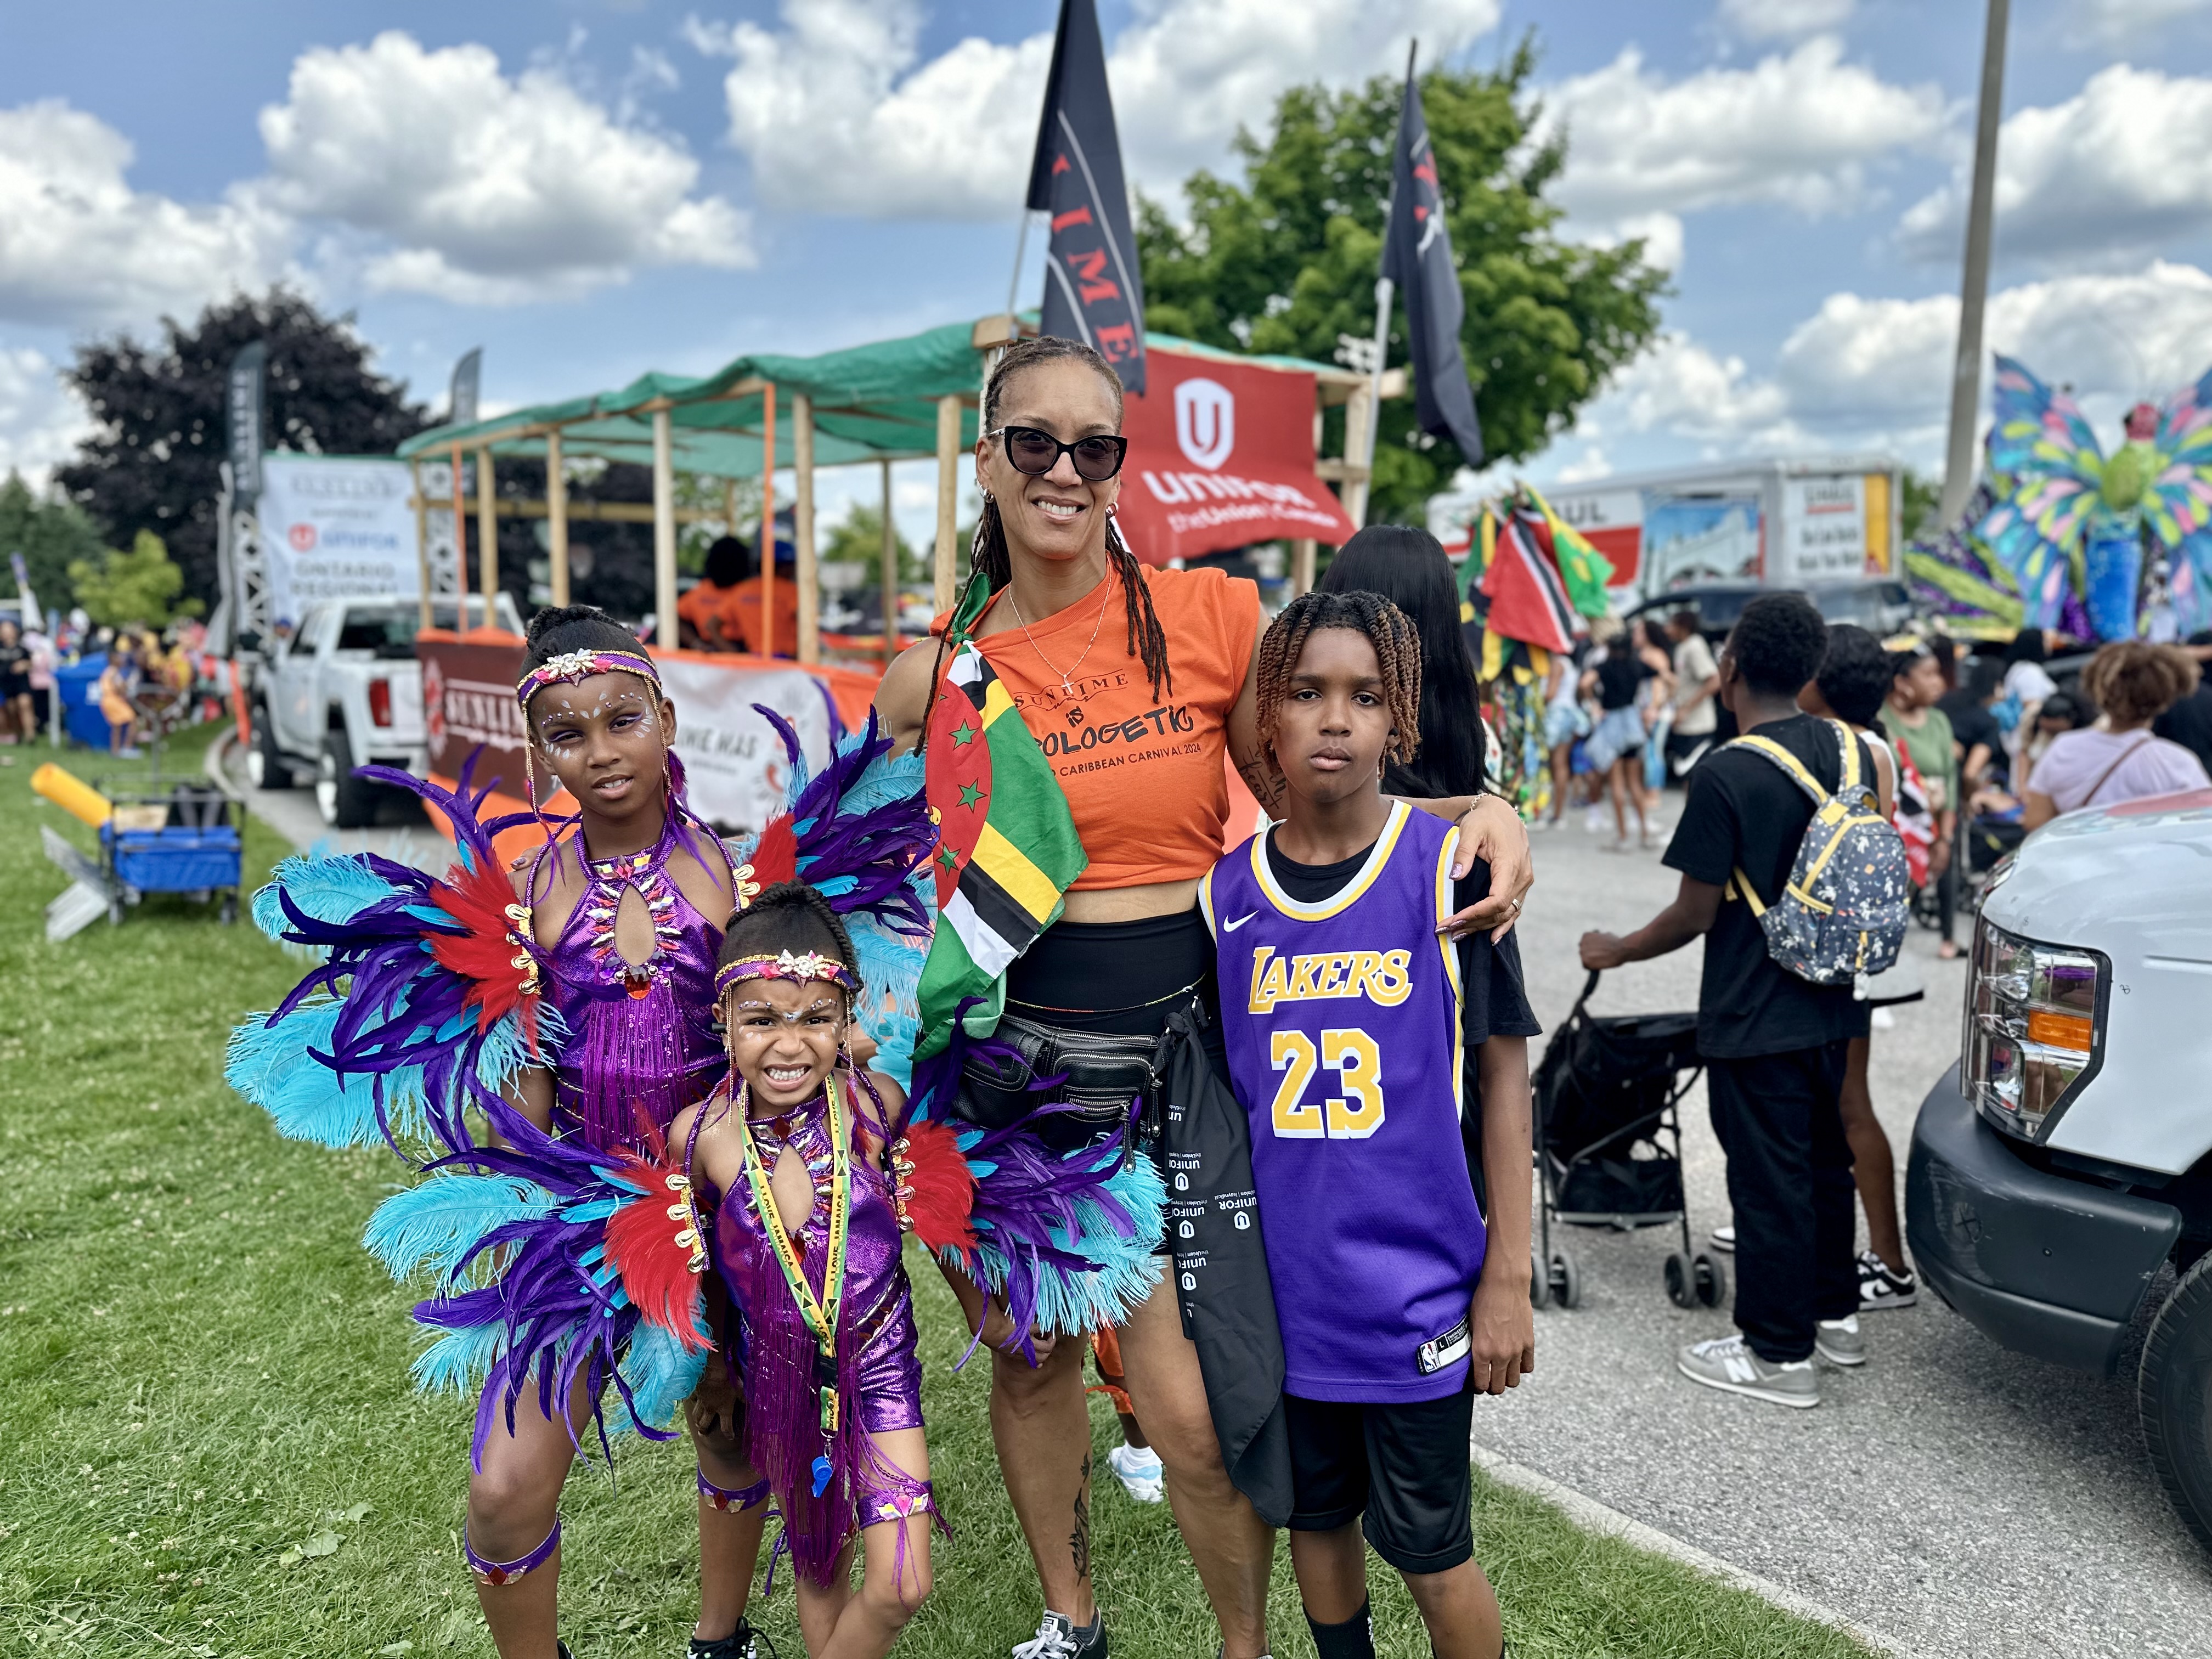 A woman with three kids, two in Caribbean costumes and one in a blue basketball jersey.